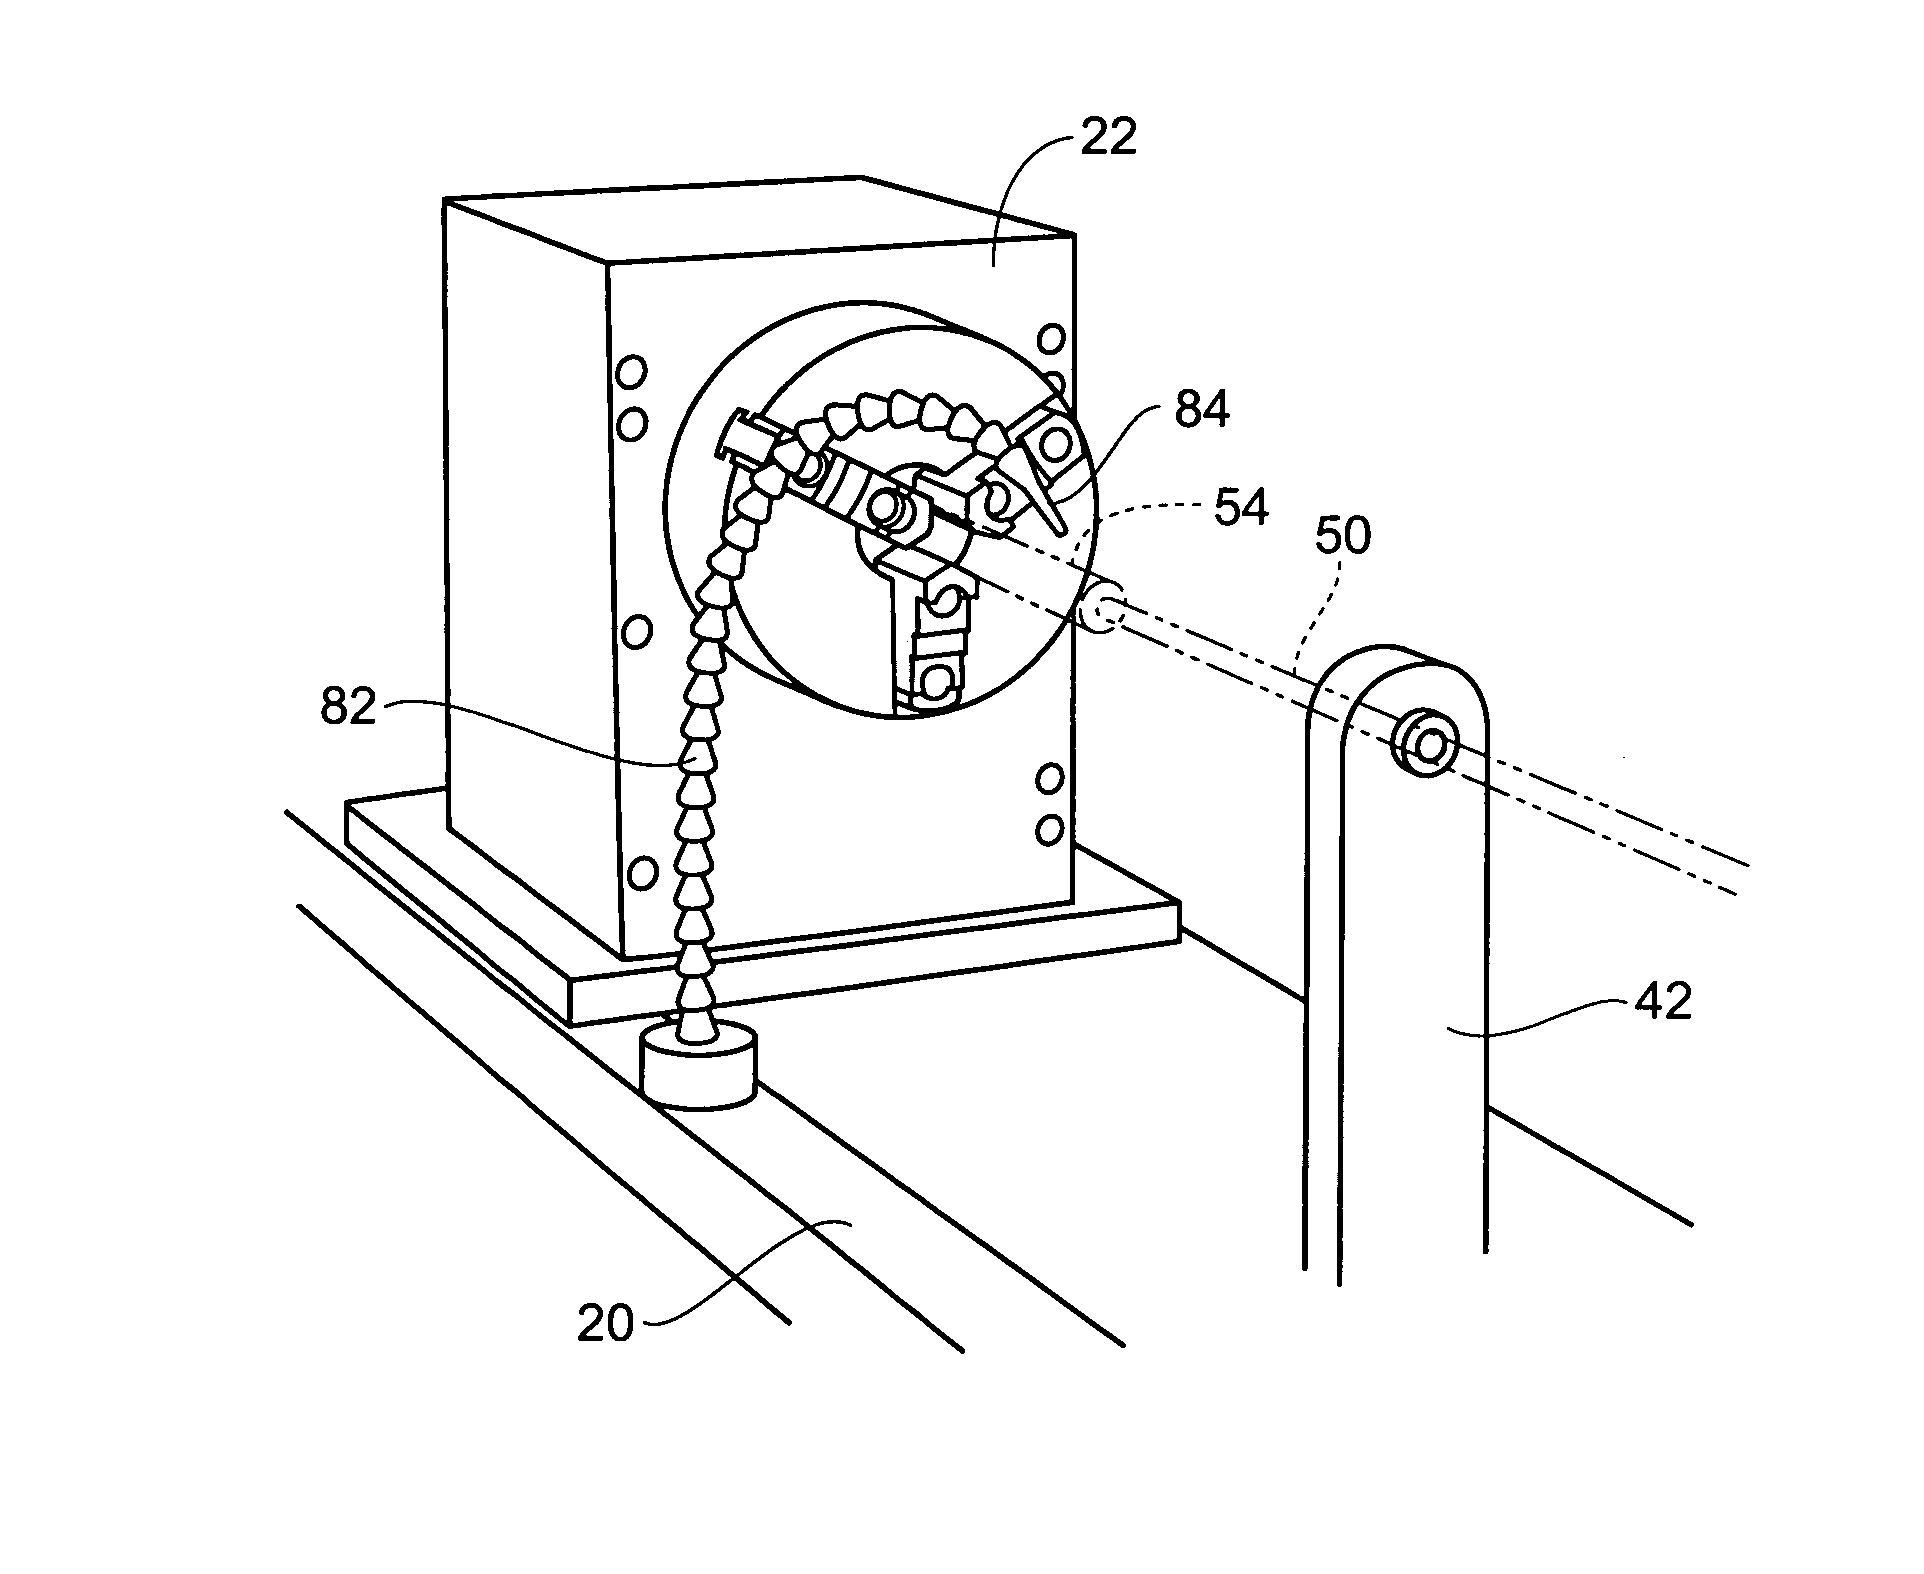 Method and apparatus for rifling a firearm barrel